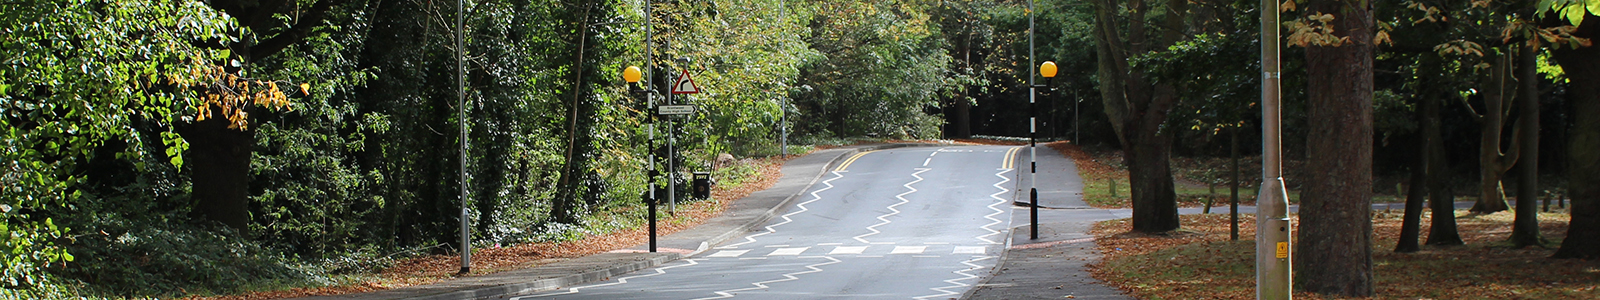 Image showing a road with a zebra crossing going across it.